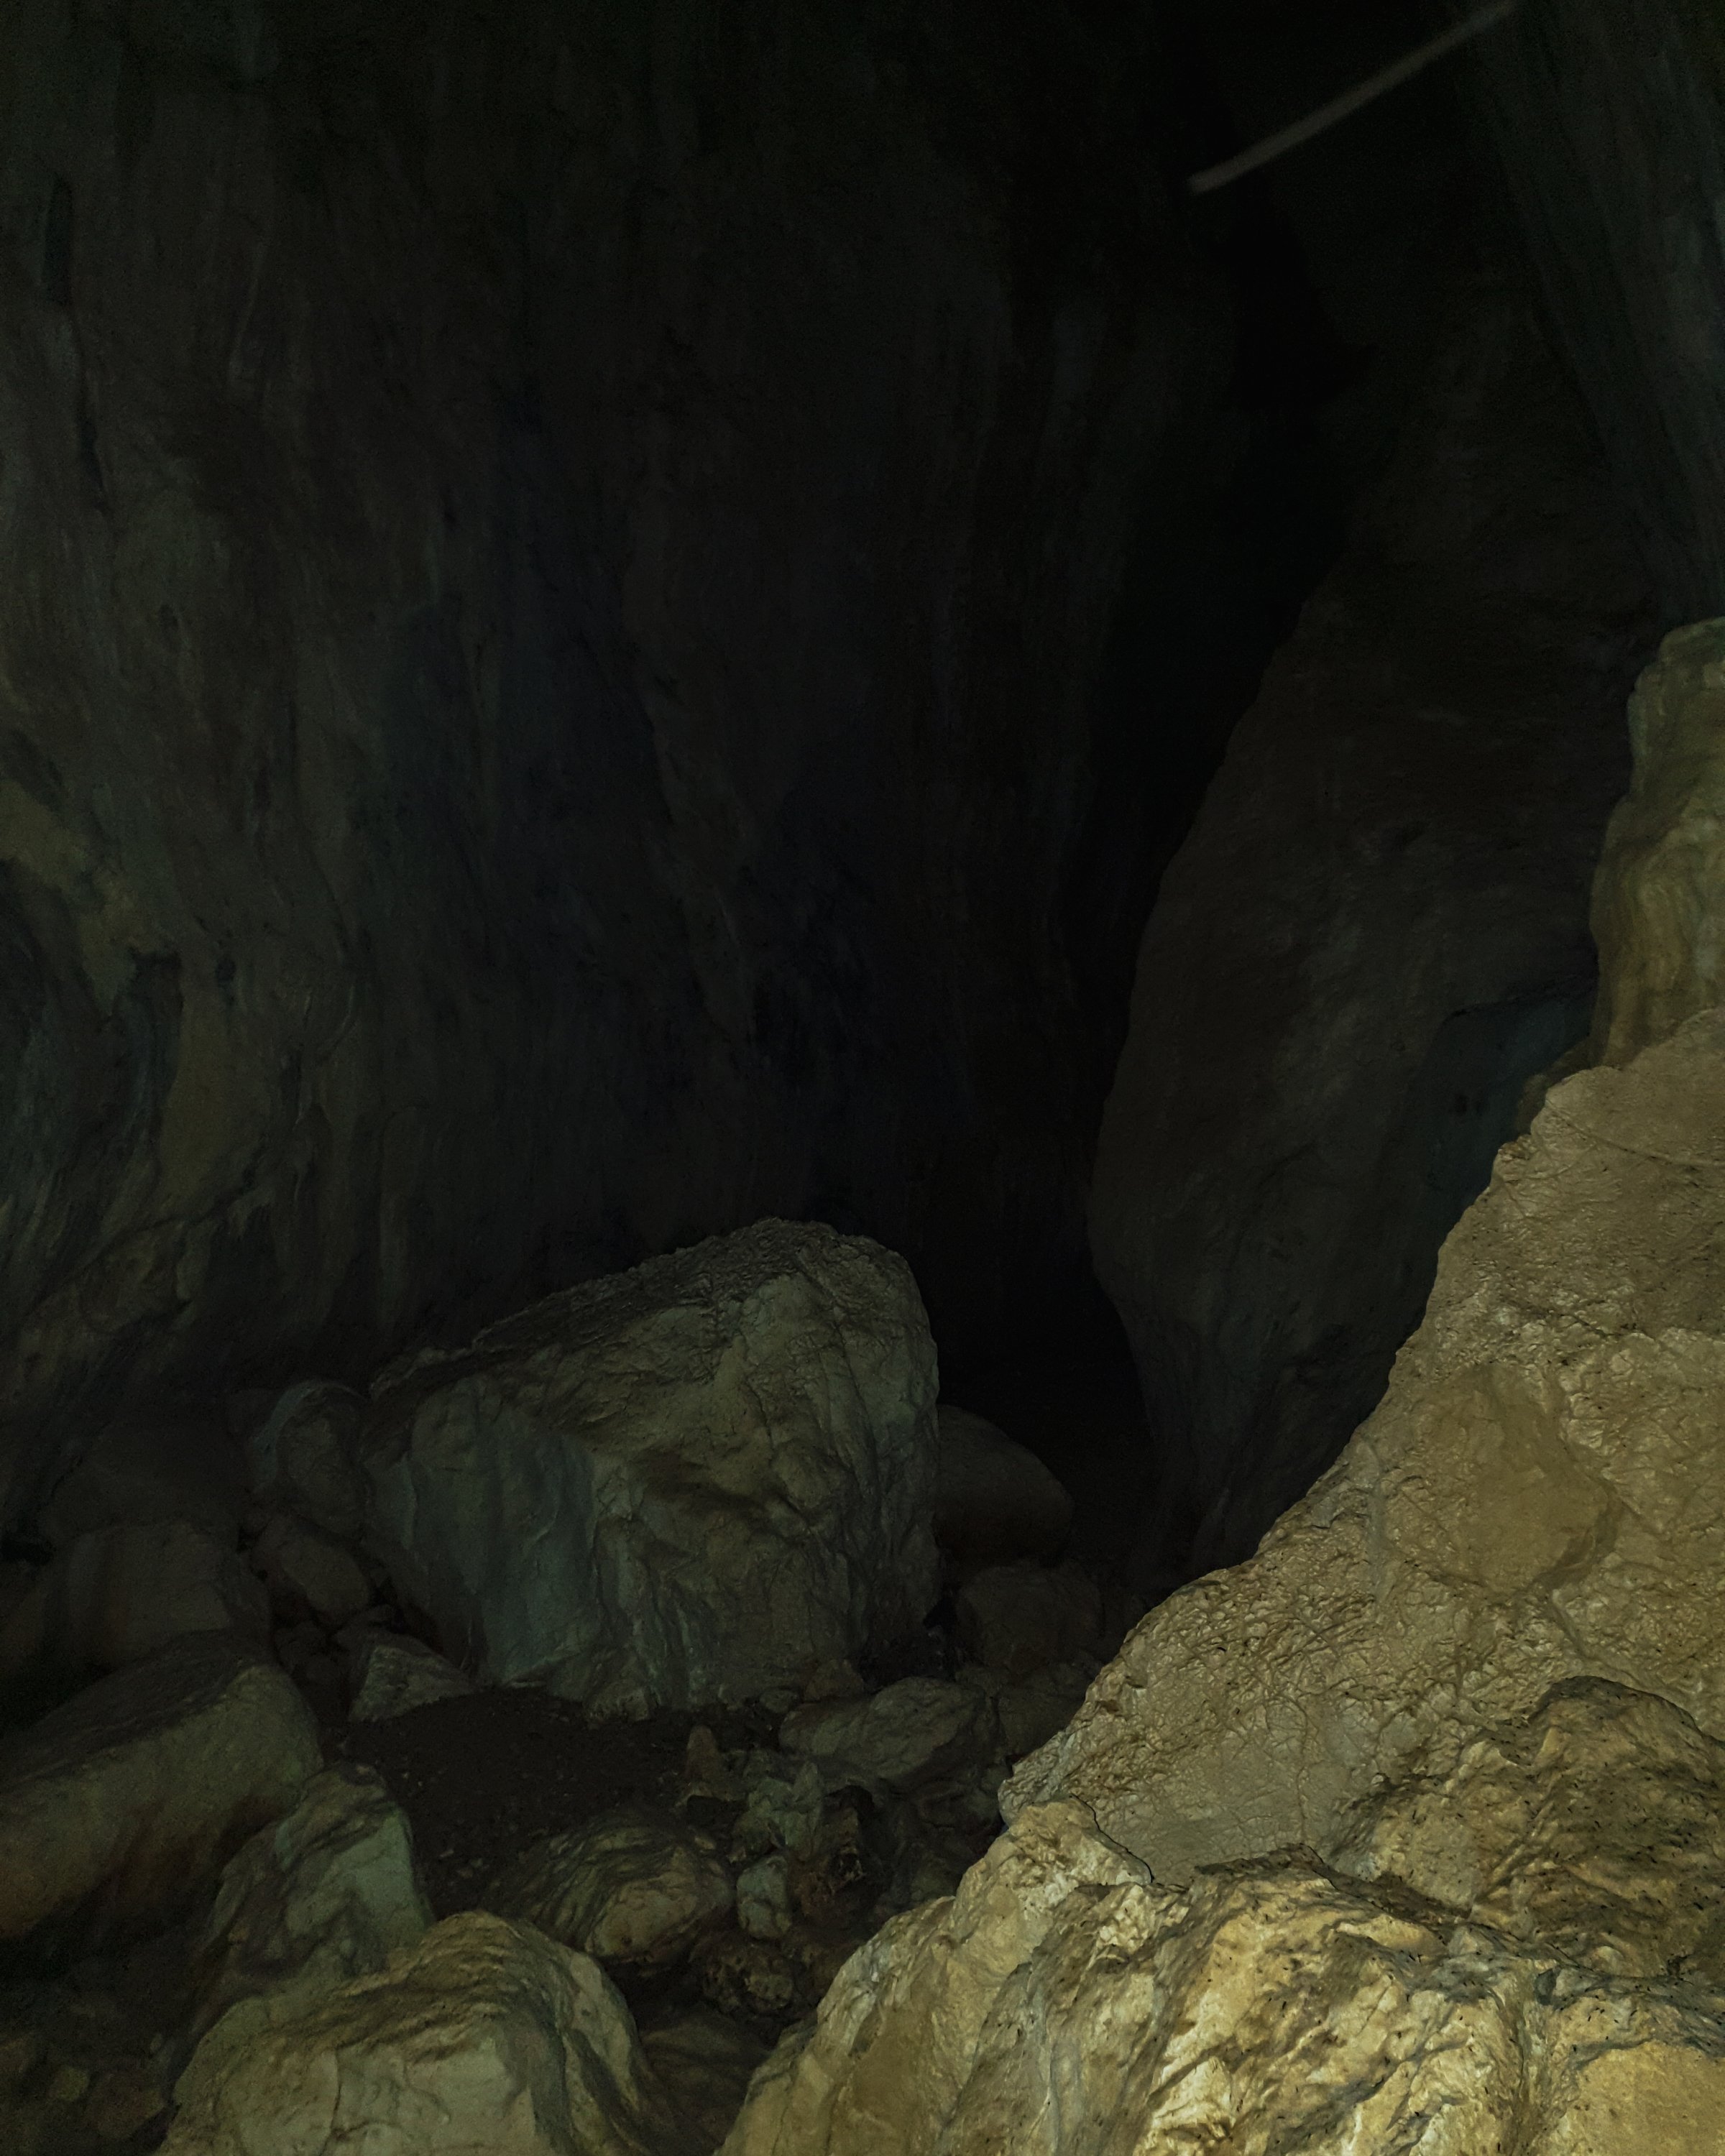 The inside of the cave is very dark, so make sure you bring a light source. (Photo by Argun Konuk)